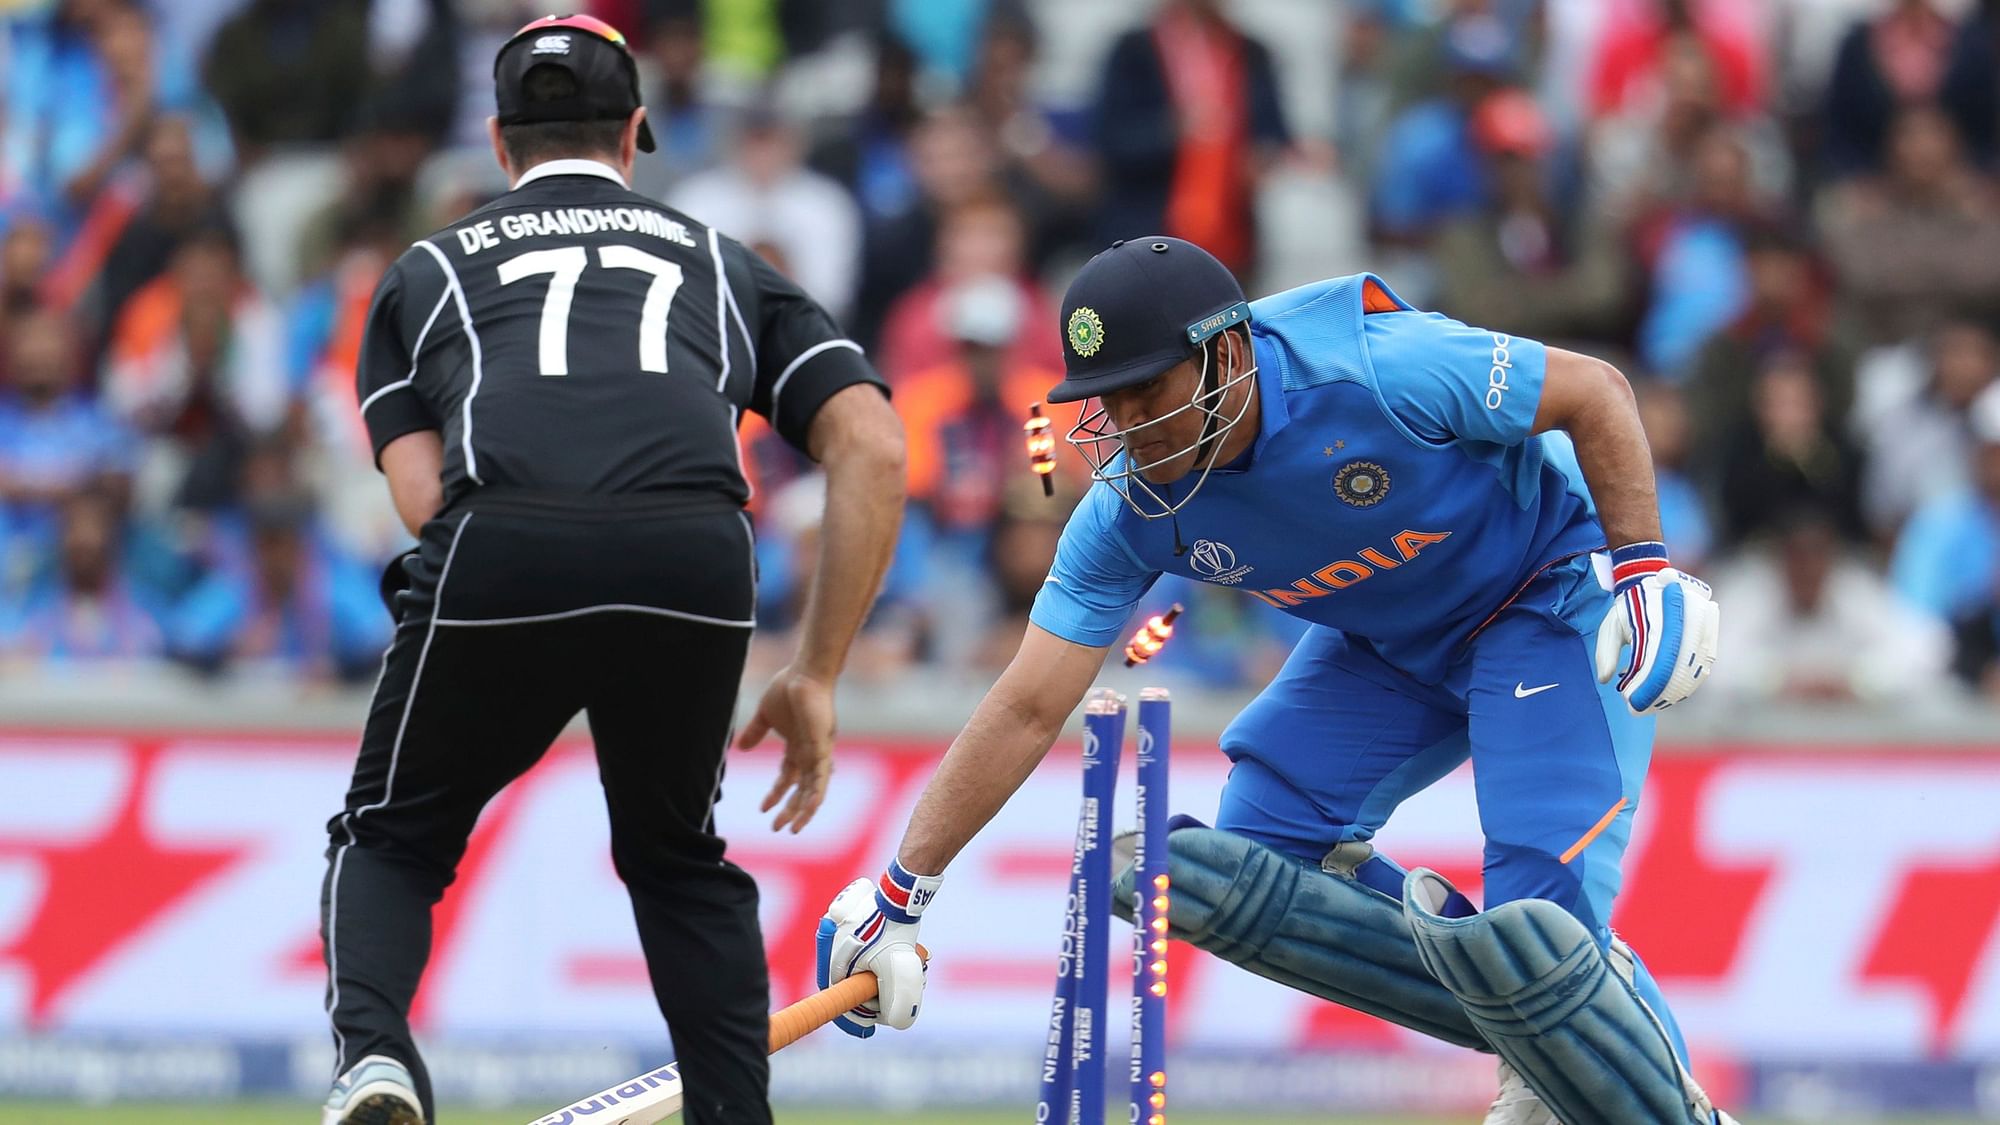 MS Dhoni was dismissed for 50 by a direct hit from Martin Guptill, with India still needing 24 runs for a win.